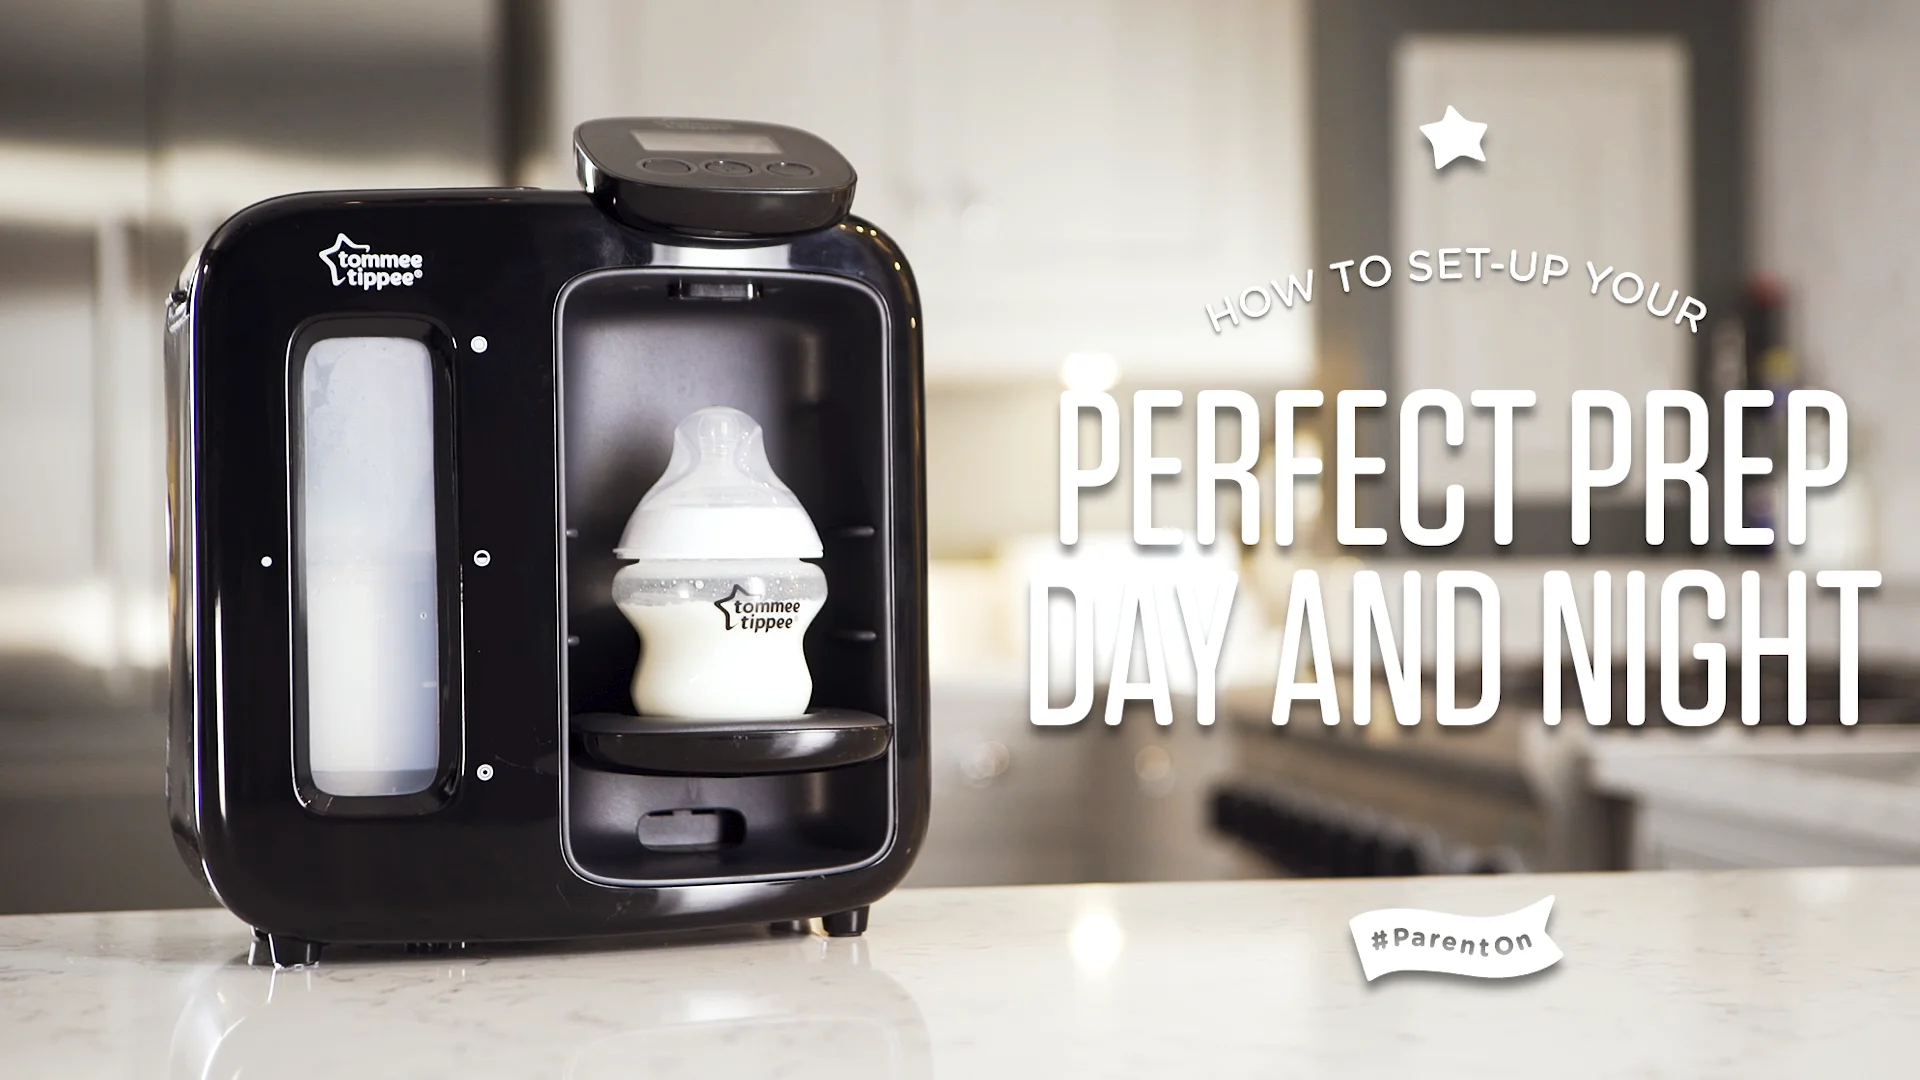 How to set up your Perfect Prep Day & Night on Vimeo